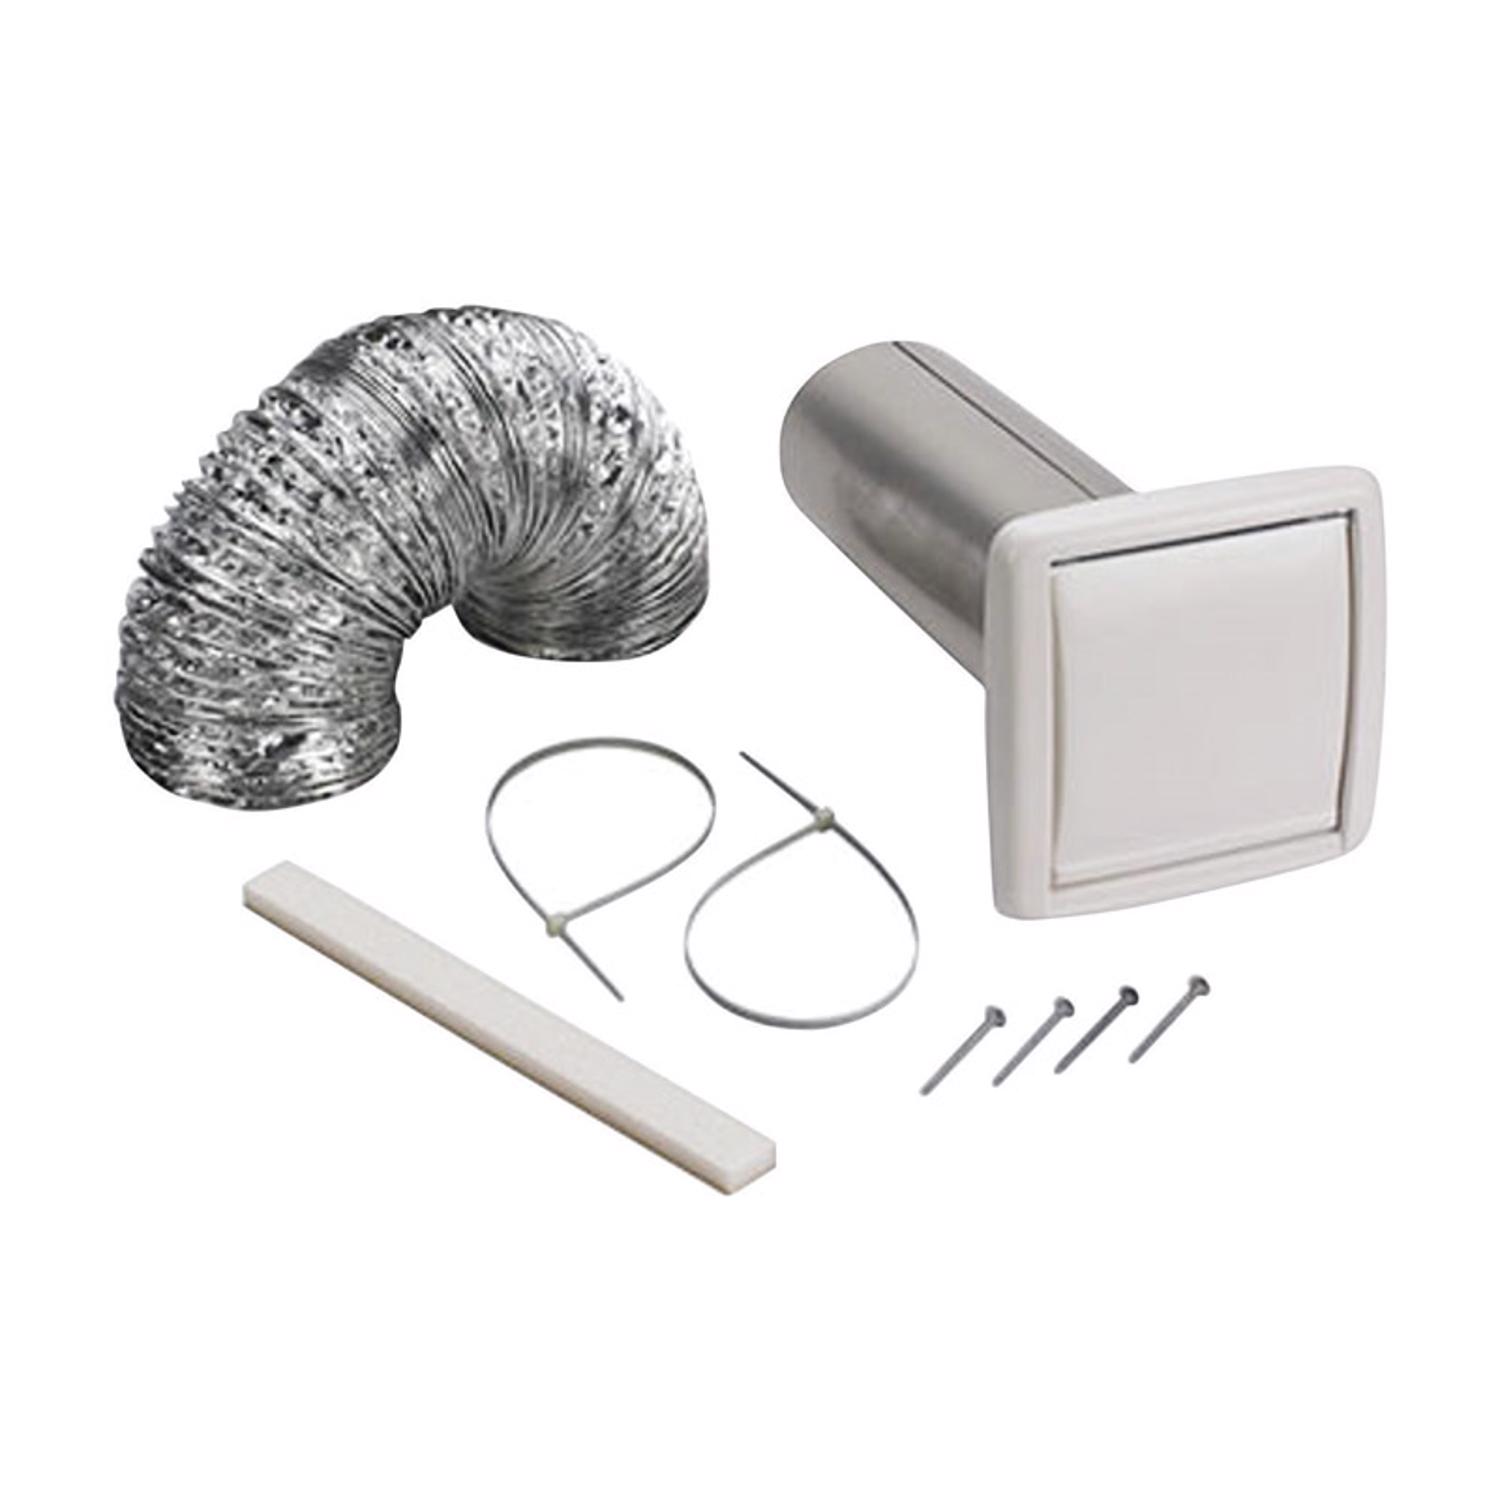 Photos - Tile Broan-NuTone 6.5 in. W X 6.5 in. L White Resin Wall Ducting Kit WVK2A